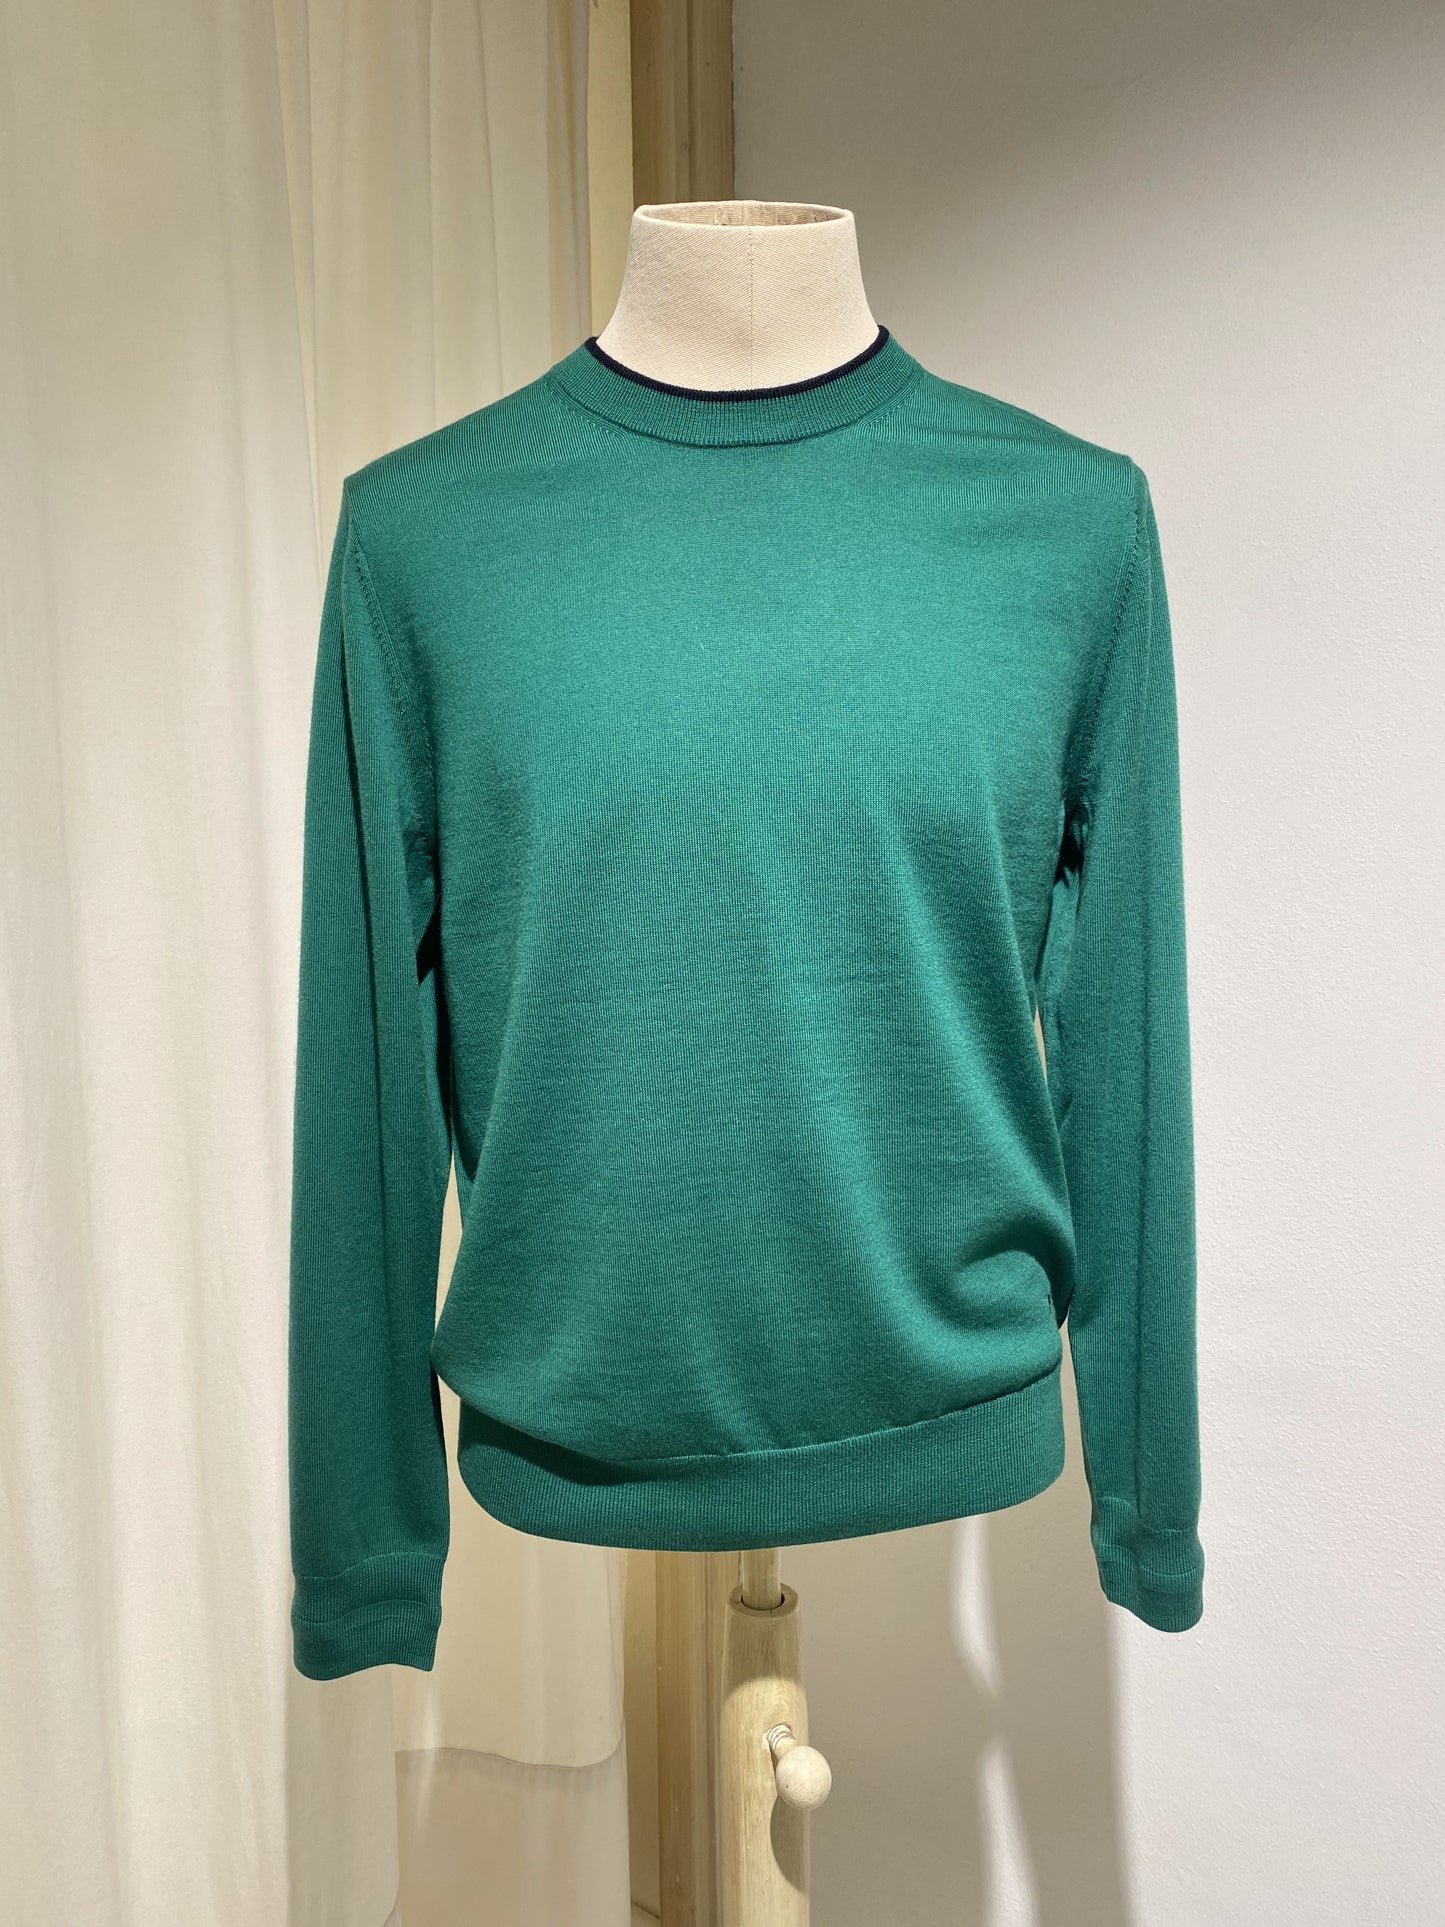 M KNITWEAR ROUND NECK PS PAUL SMITH PINE GREEN